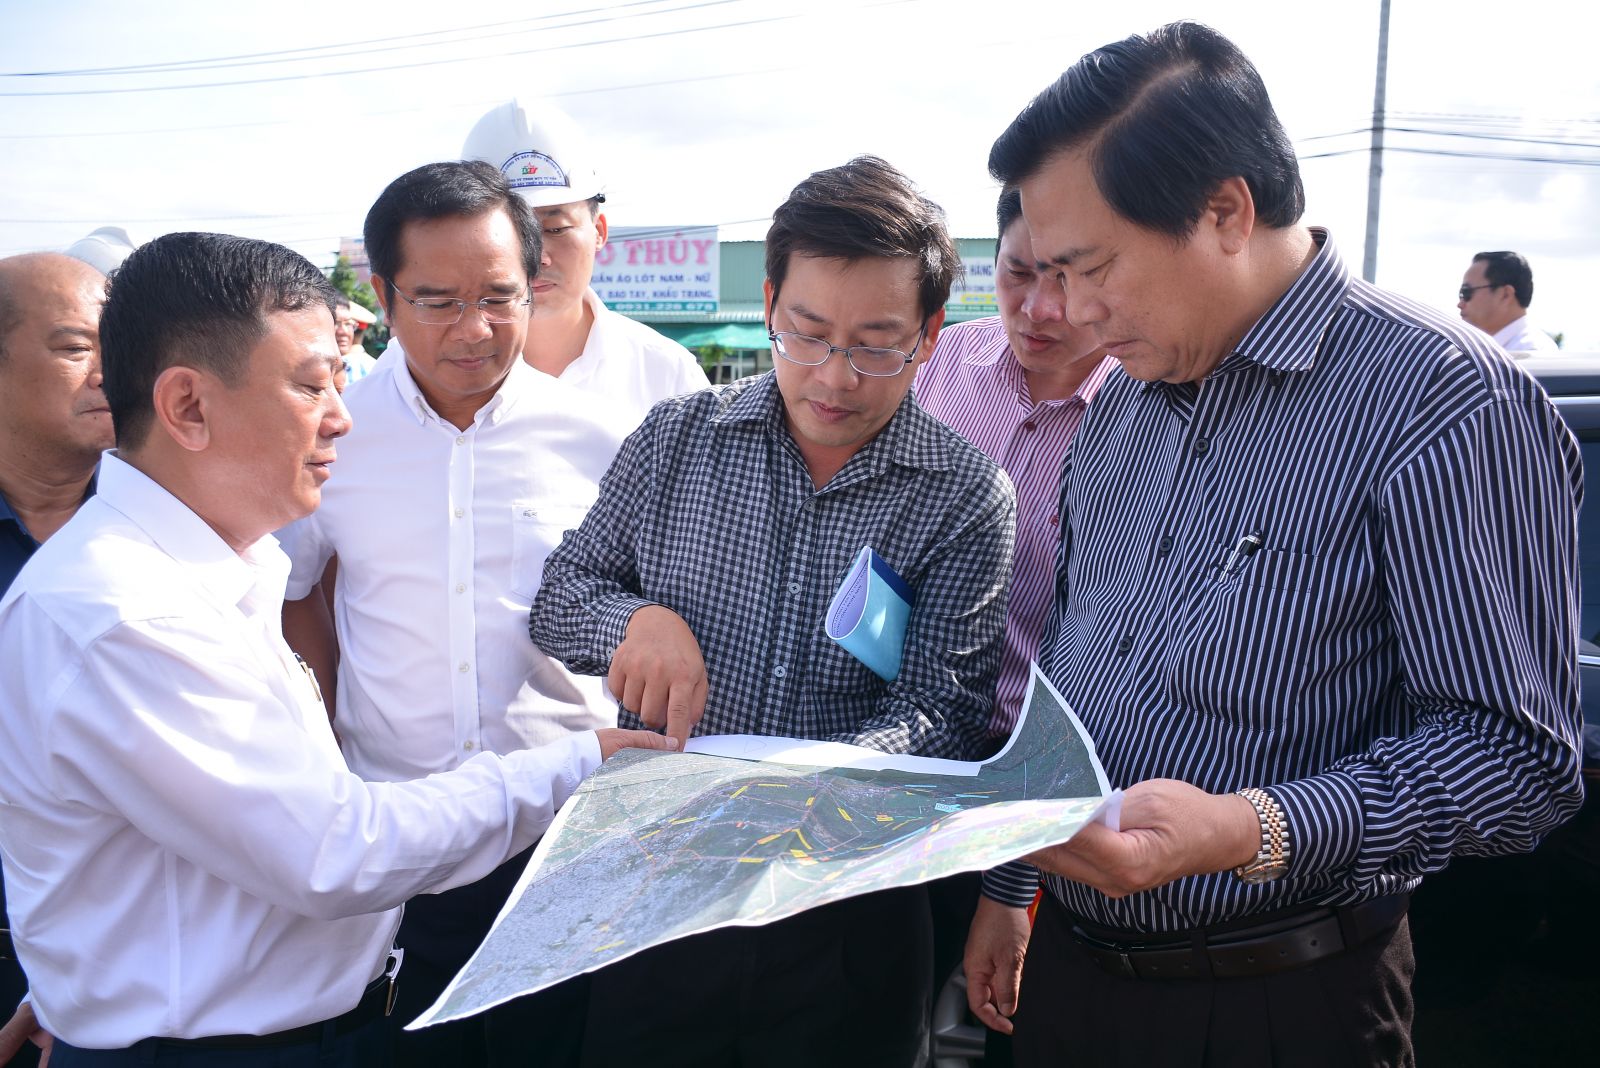 Secretary of Provincial Party Committee, Chairman of Provincial People's Council - Pham Van Ranh proposes that the transport sector should study one more parallel route to Provincial Road 830 from Highway 50 to Long An International Port to improve the operating efficiency of Long An International Port when 7 wharves are completed.